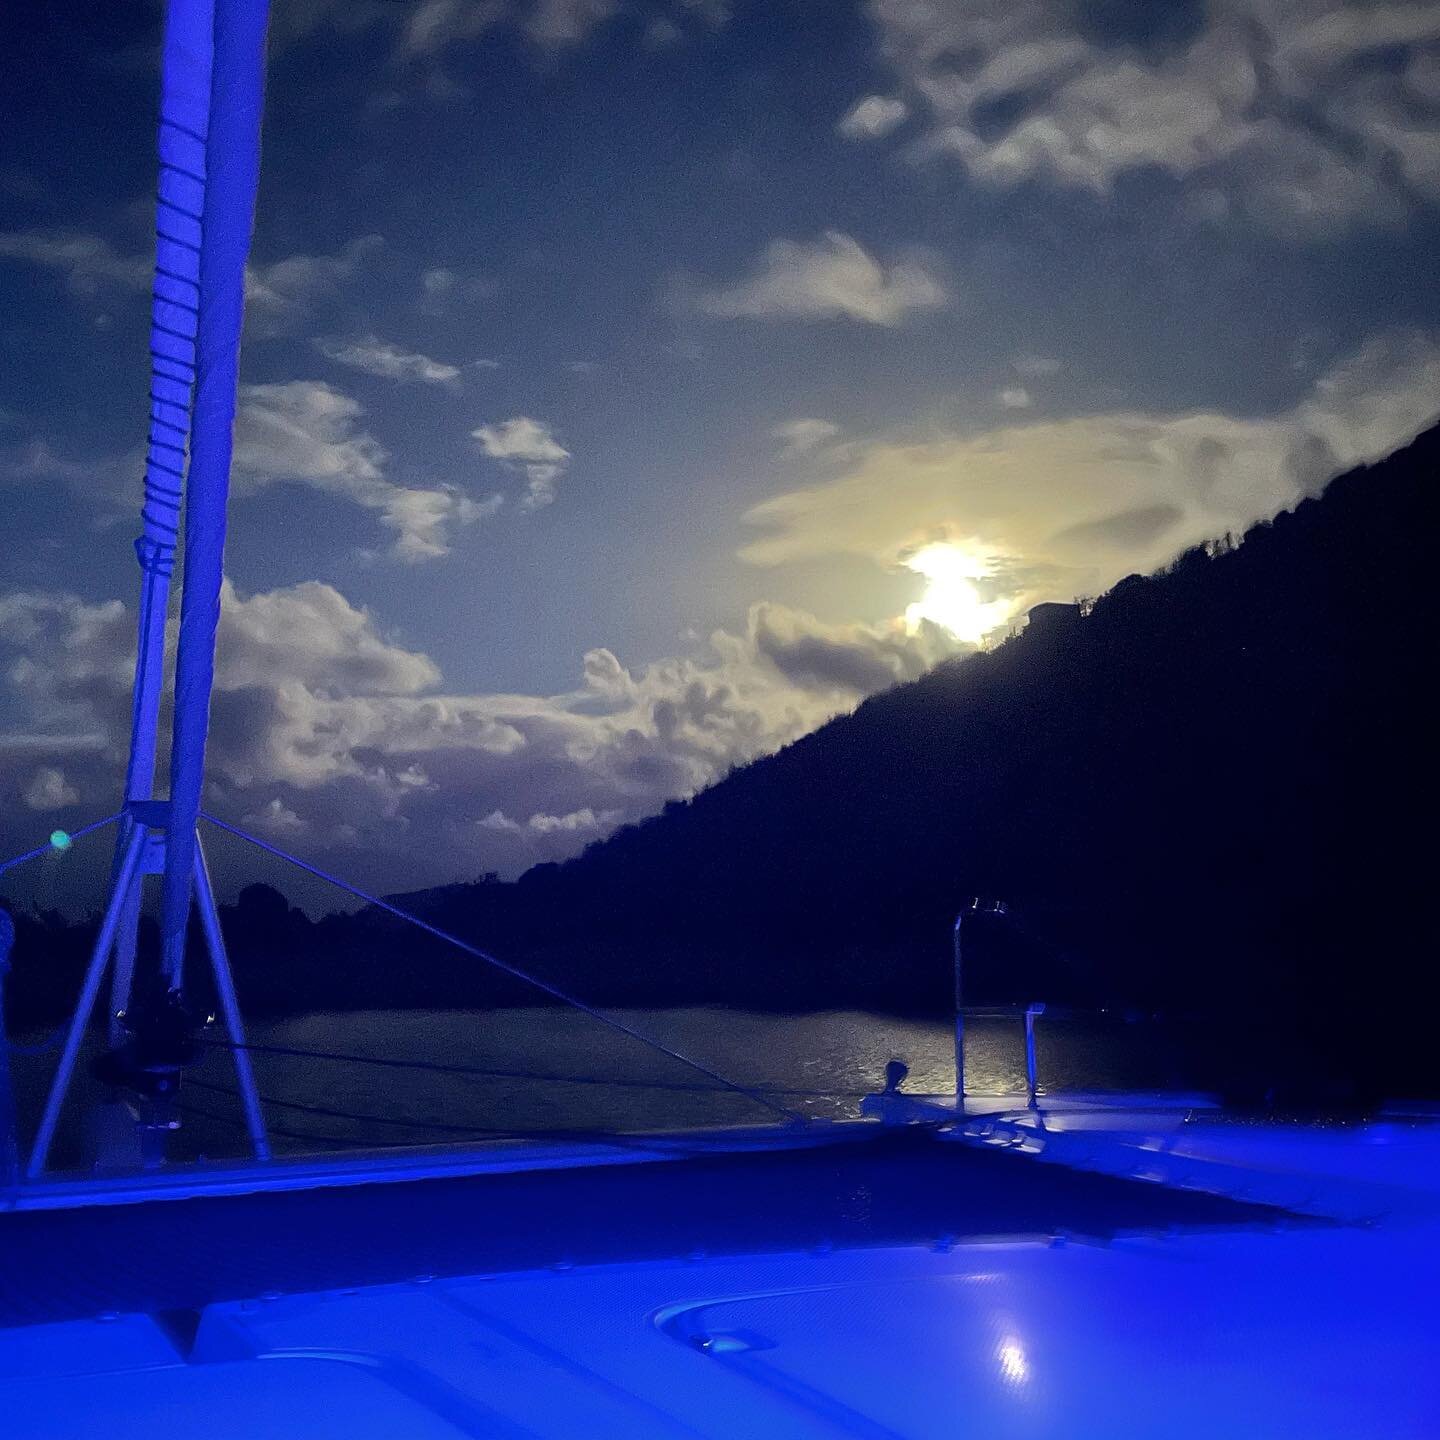 You can find legendary full moon parties in Trellis Bay, Cane Garden, Jost Van Dyke&hellip;and aboard your charter yacht Allende. 🌝